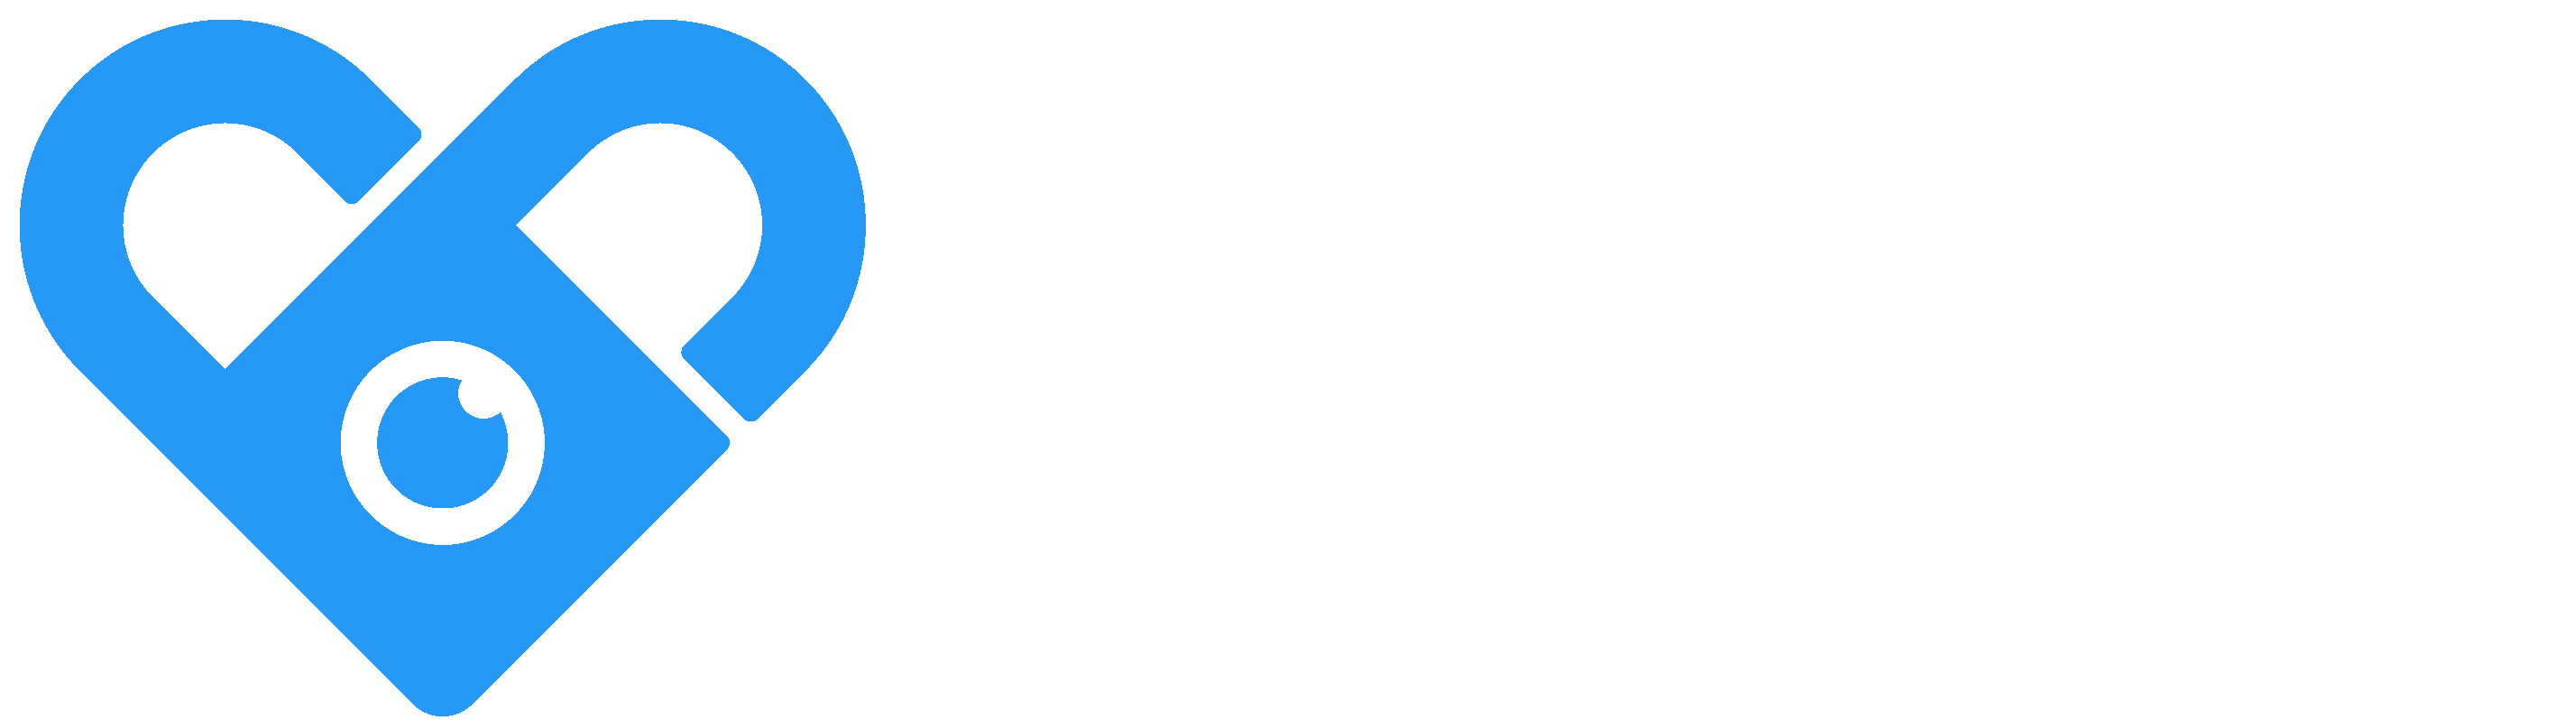 Free fansly accounts